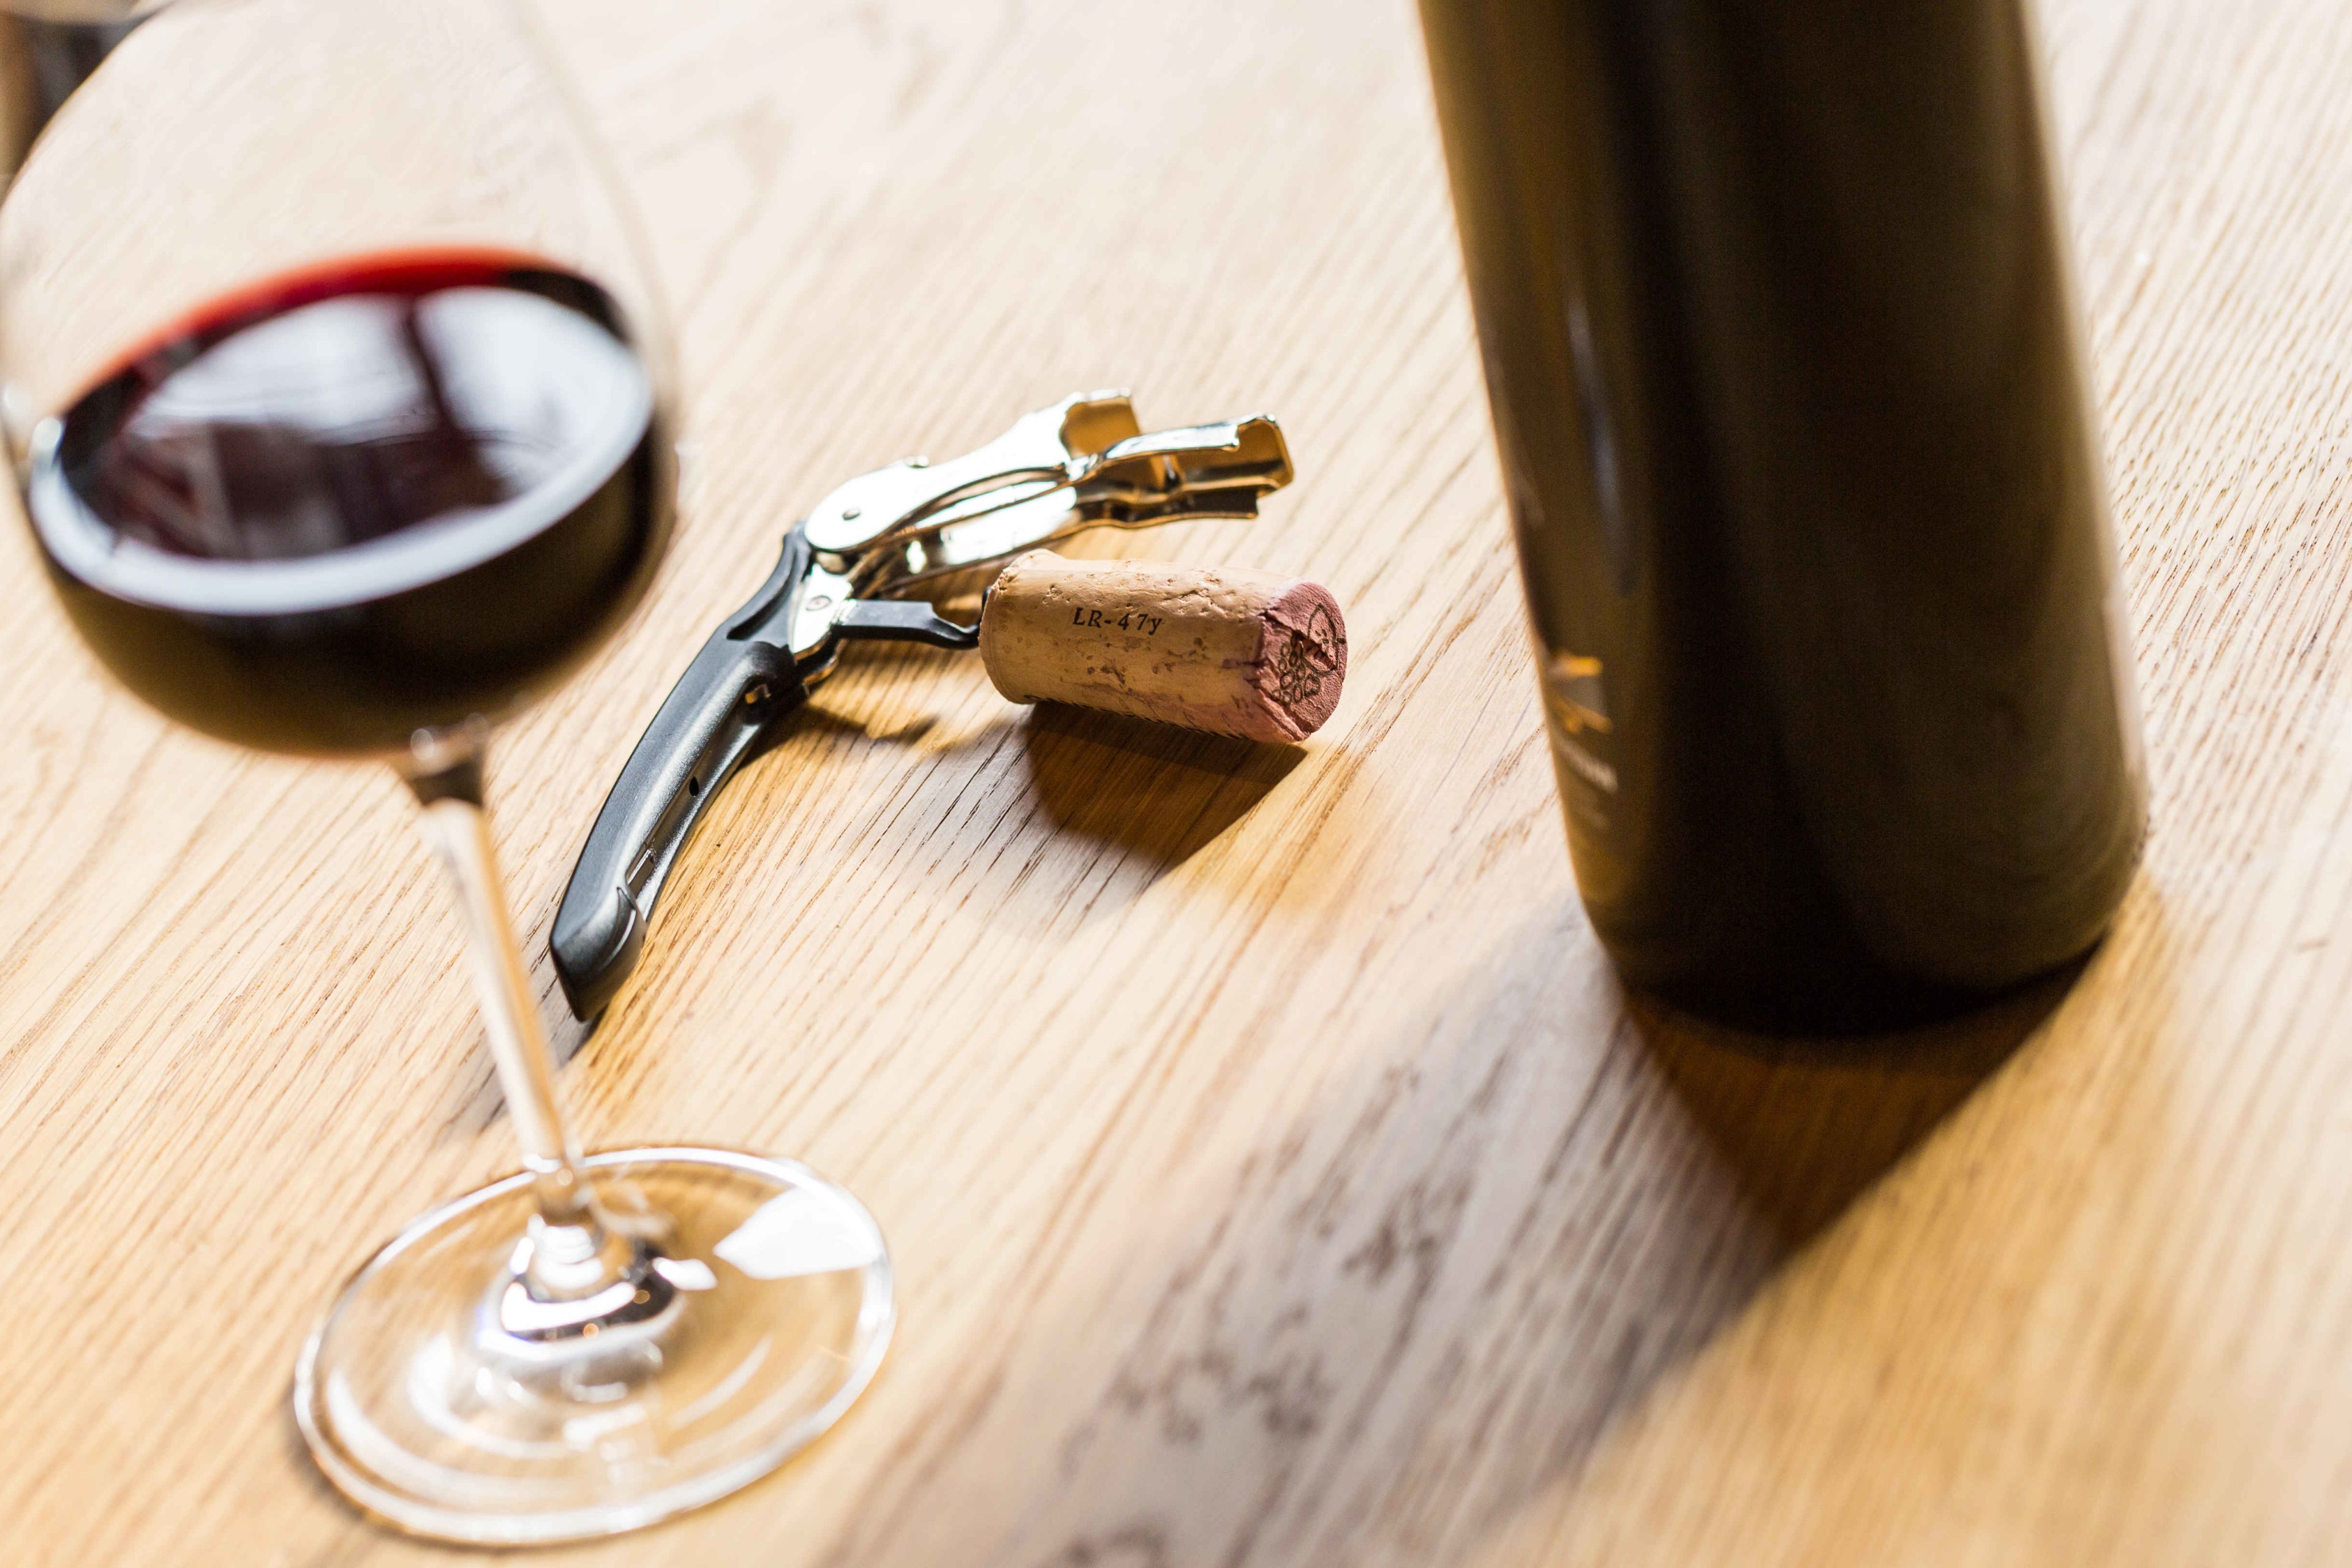 A bottle of Valaisan wine with its corkscrew and a wine glass, Valais Switzerland